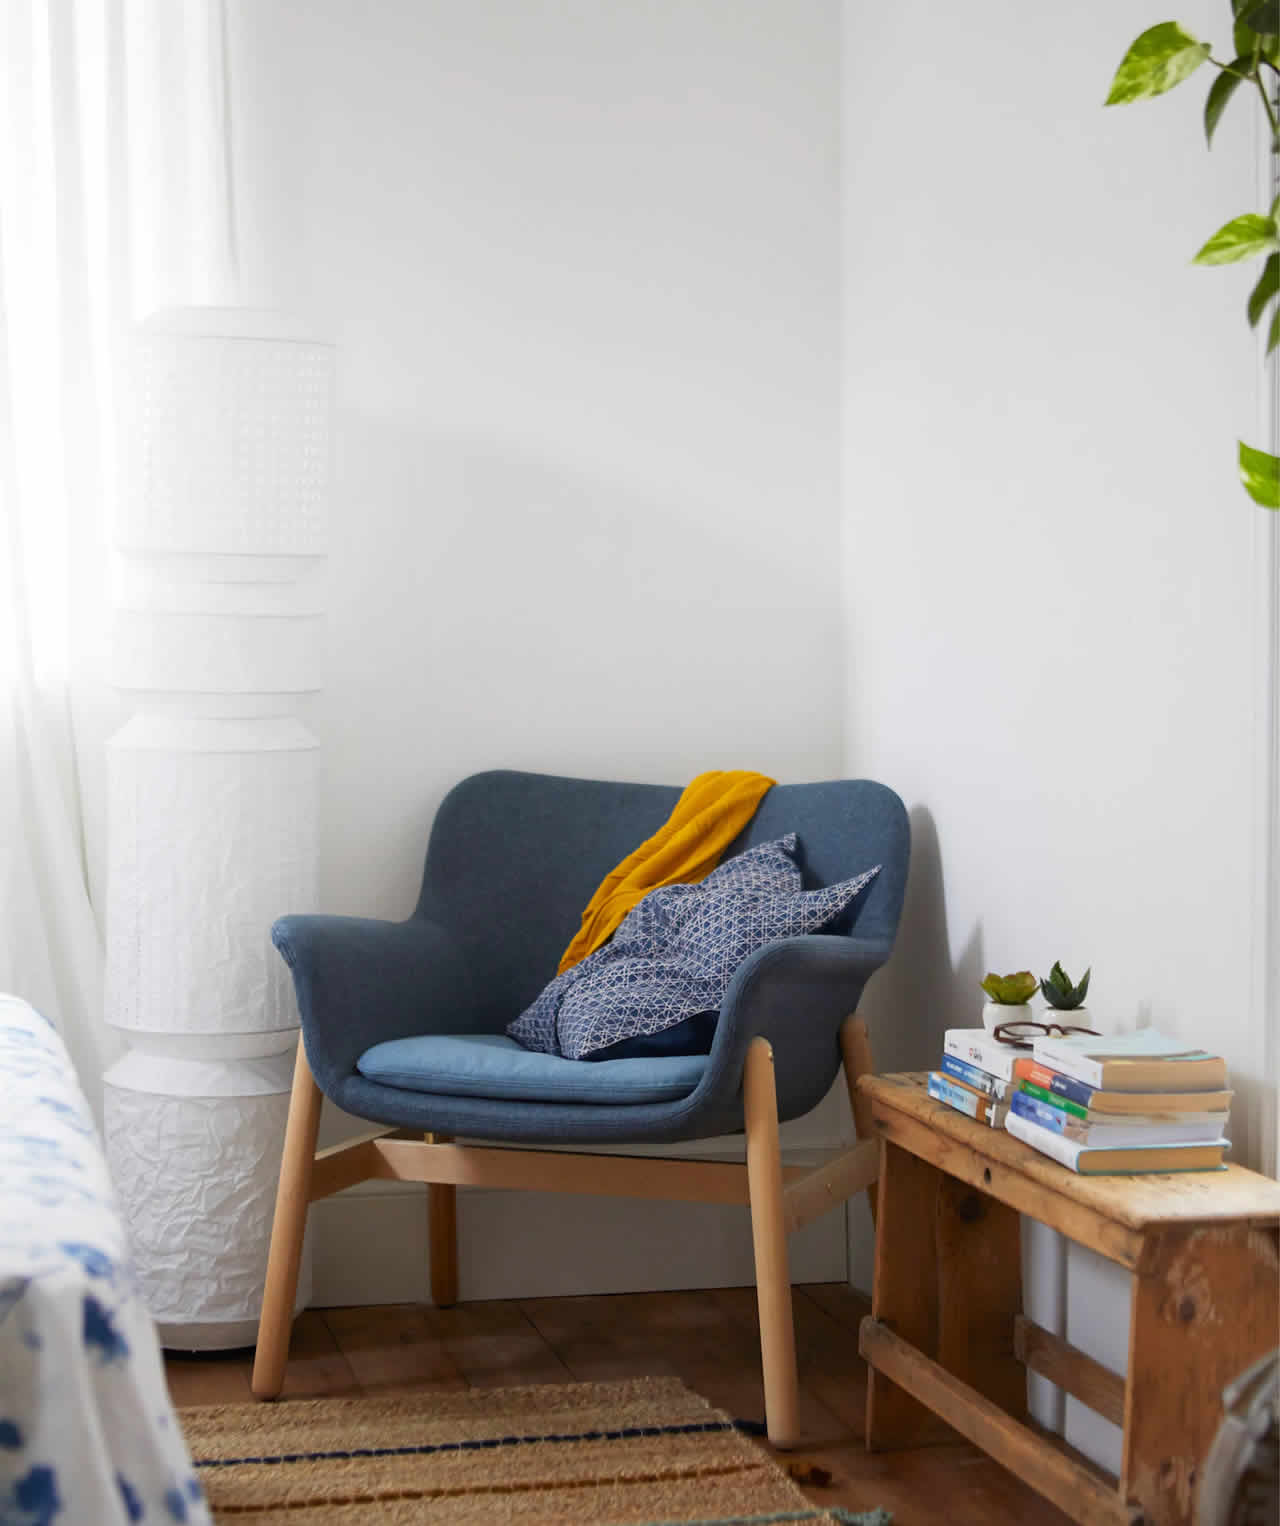 IKEA Ideas - Home visit: calm decor for a stress-free bedroom